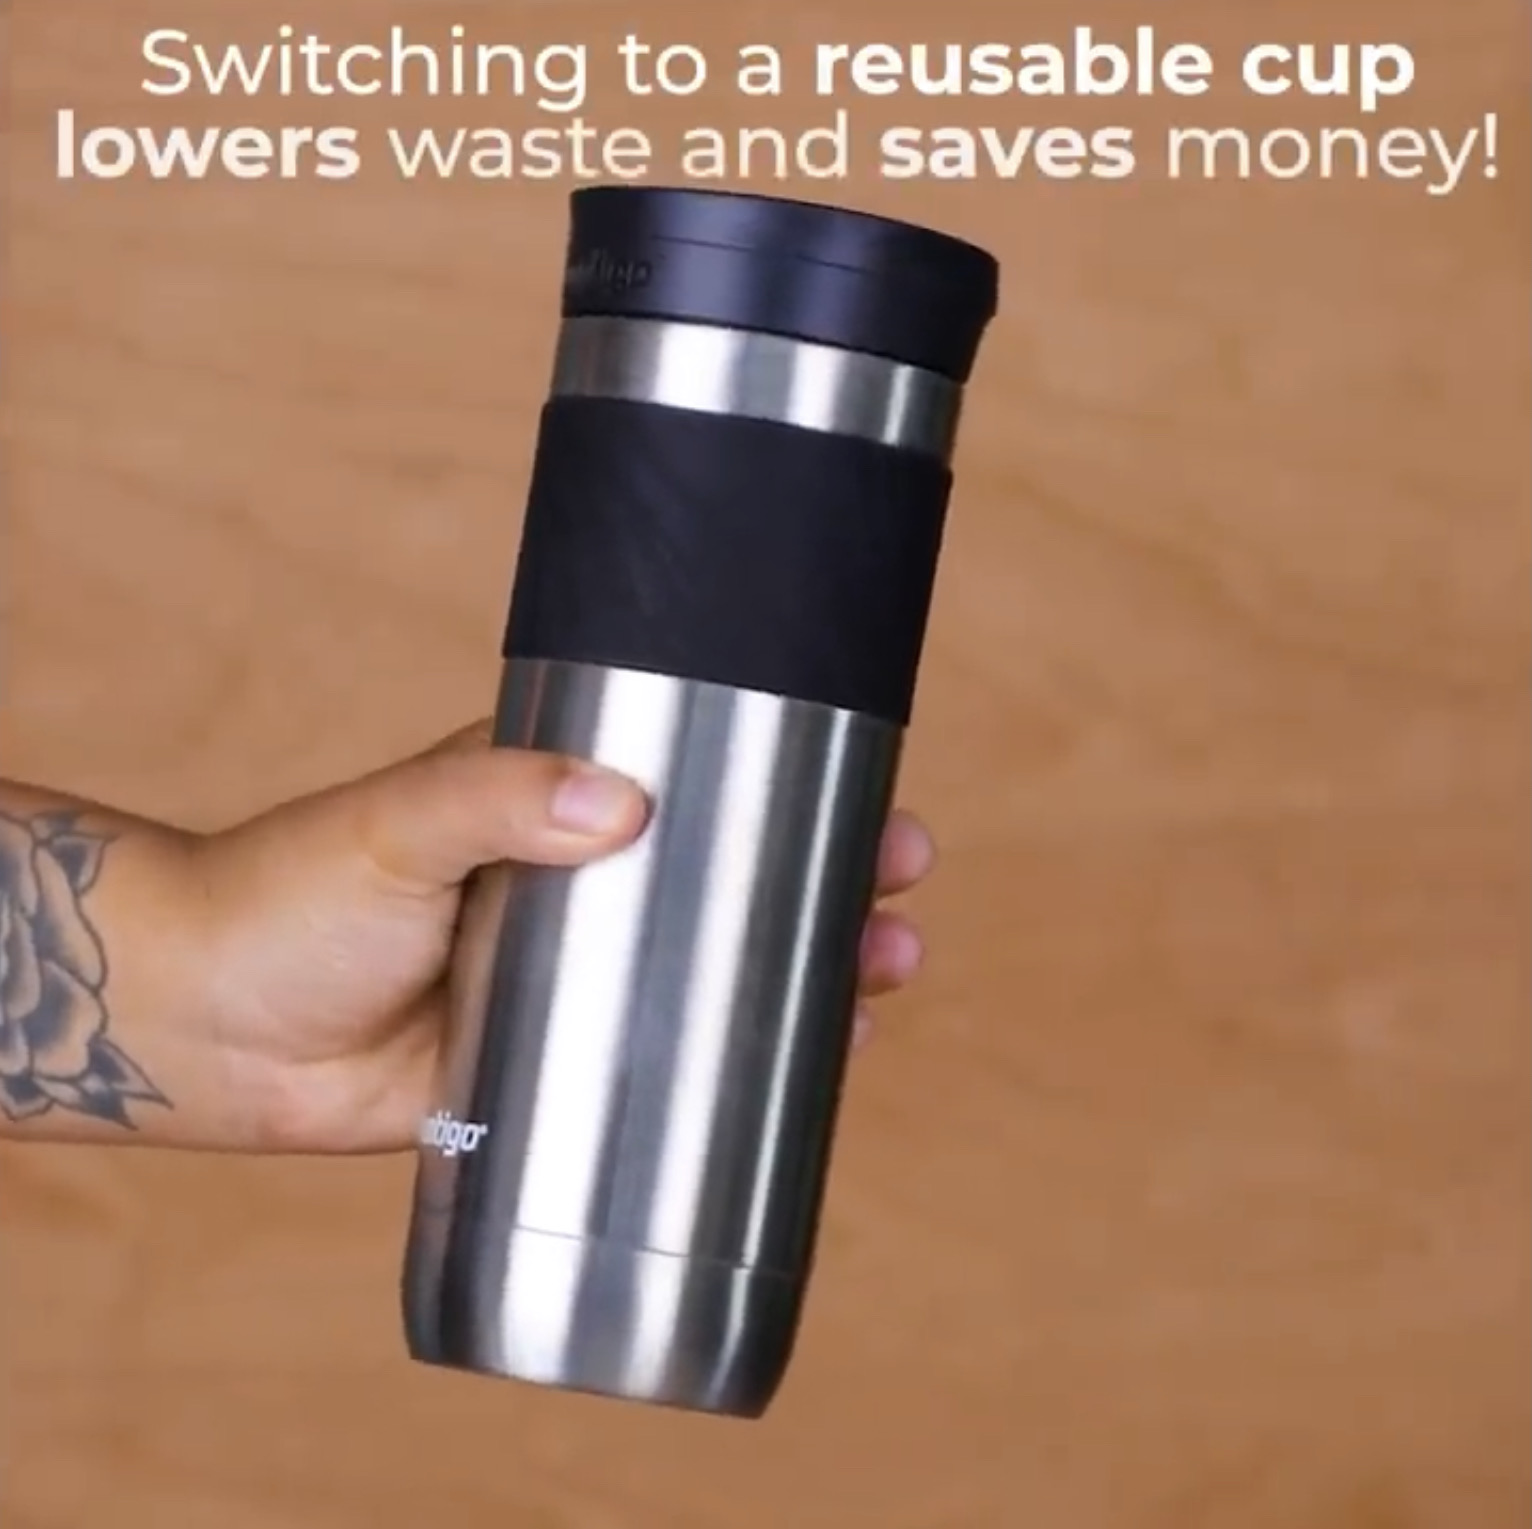 People use about 25 paper cups per month. Switching to a reusable cup reduces waste and saves money.